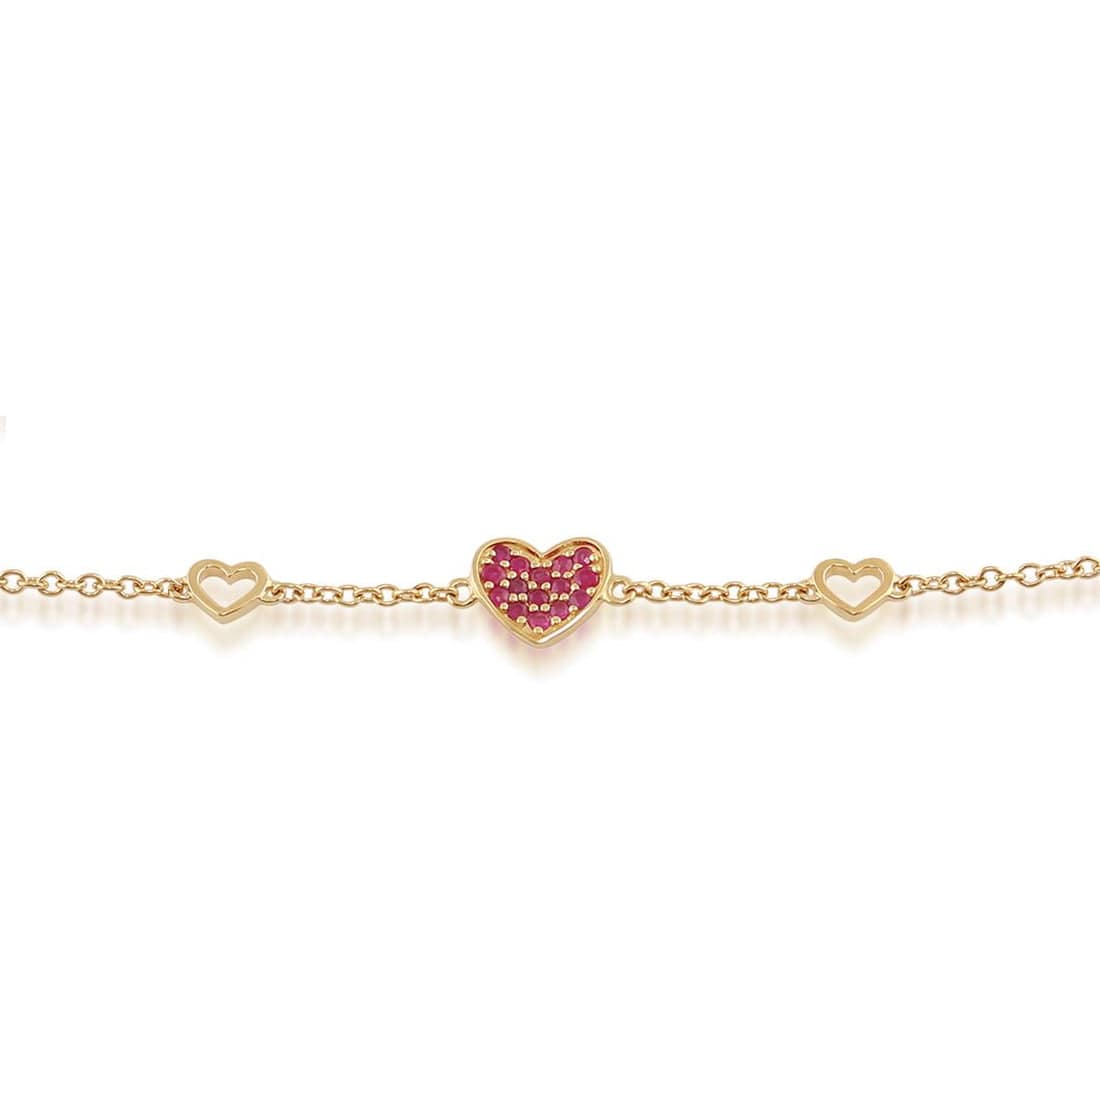 Love You More Ruby Heart Bracelet in 9ct Yellow Gold - Gemondo